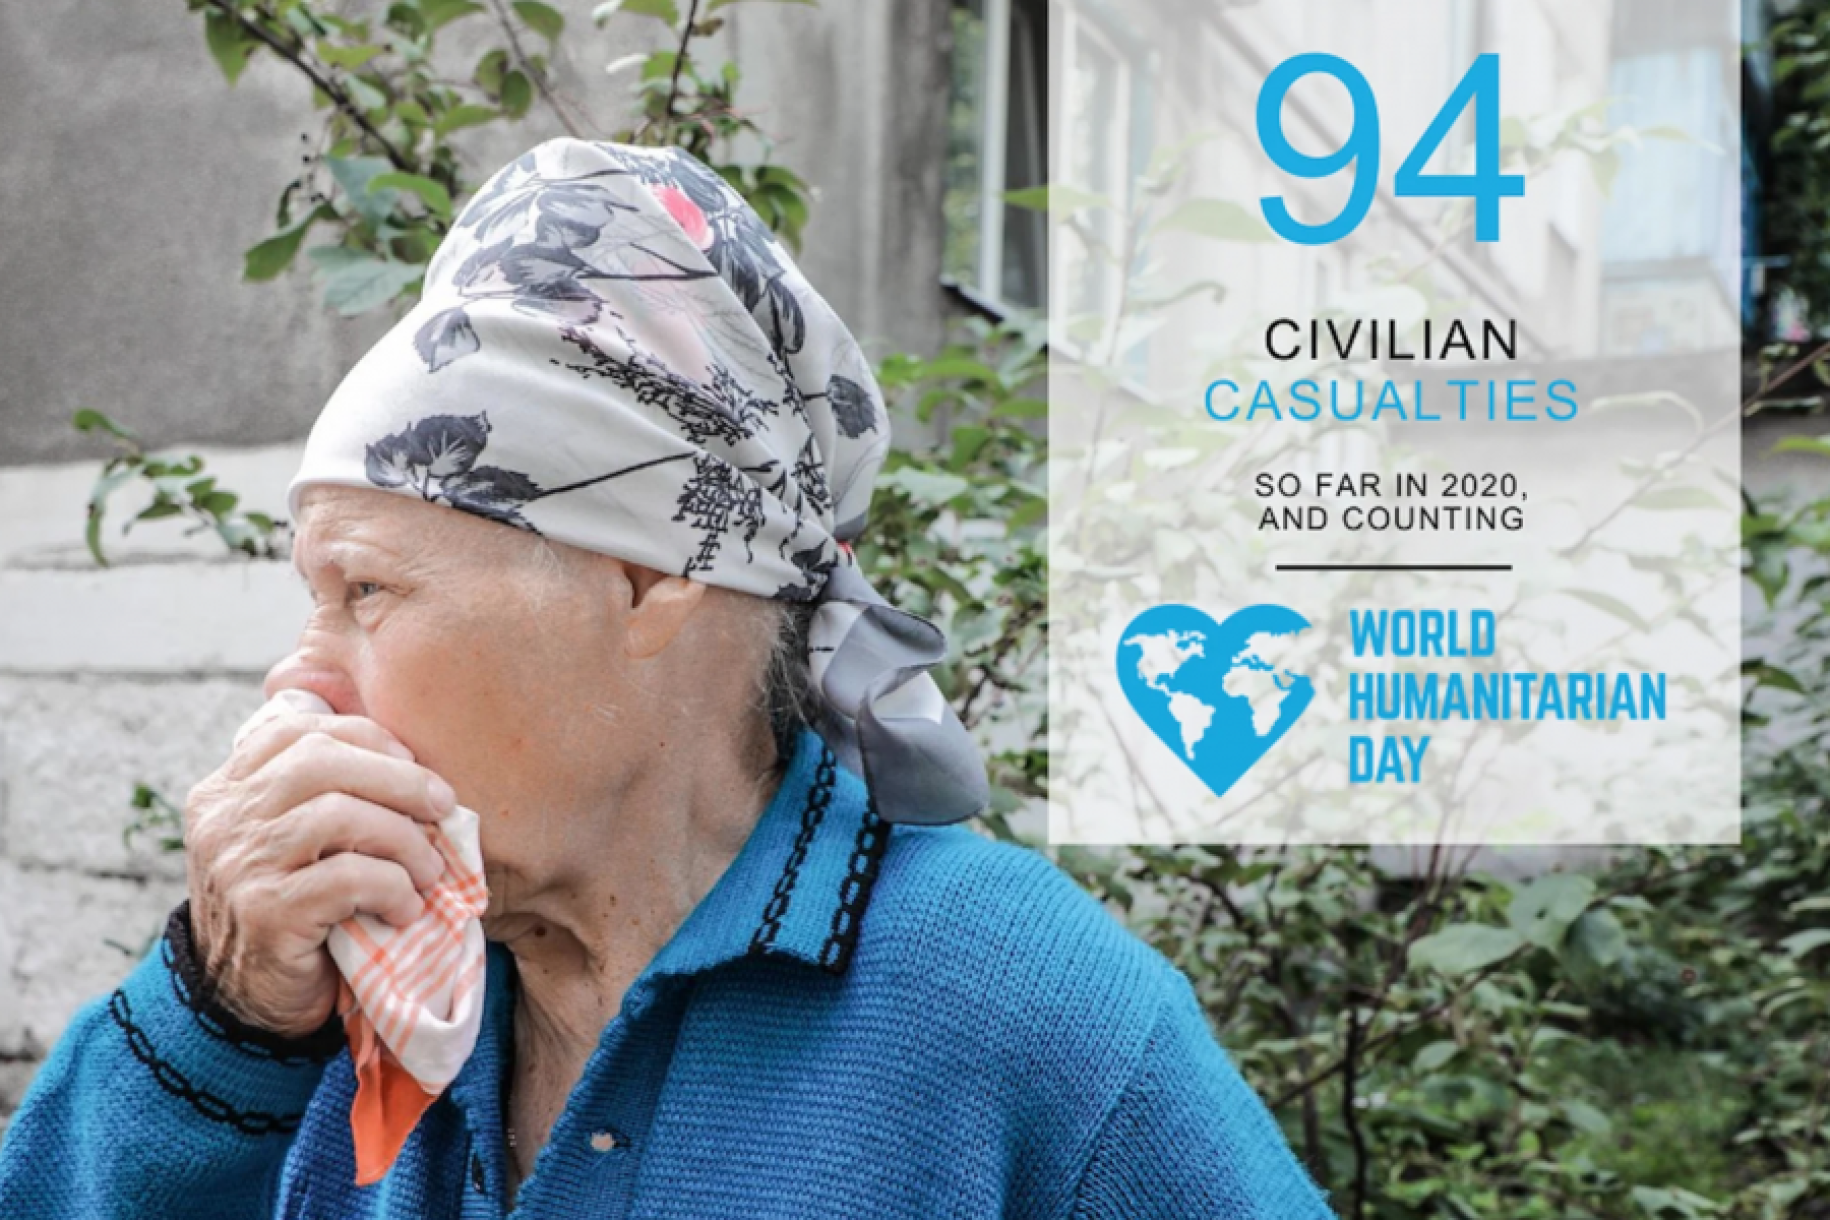 Older woman looks away from the camera while covering her mouth with a cloth napkin. A factoid is placed by her noting there have been 94 civilian casualties so far in 2020.